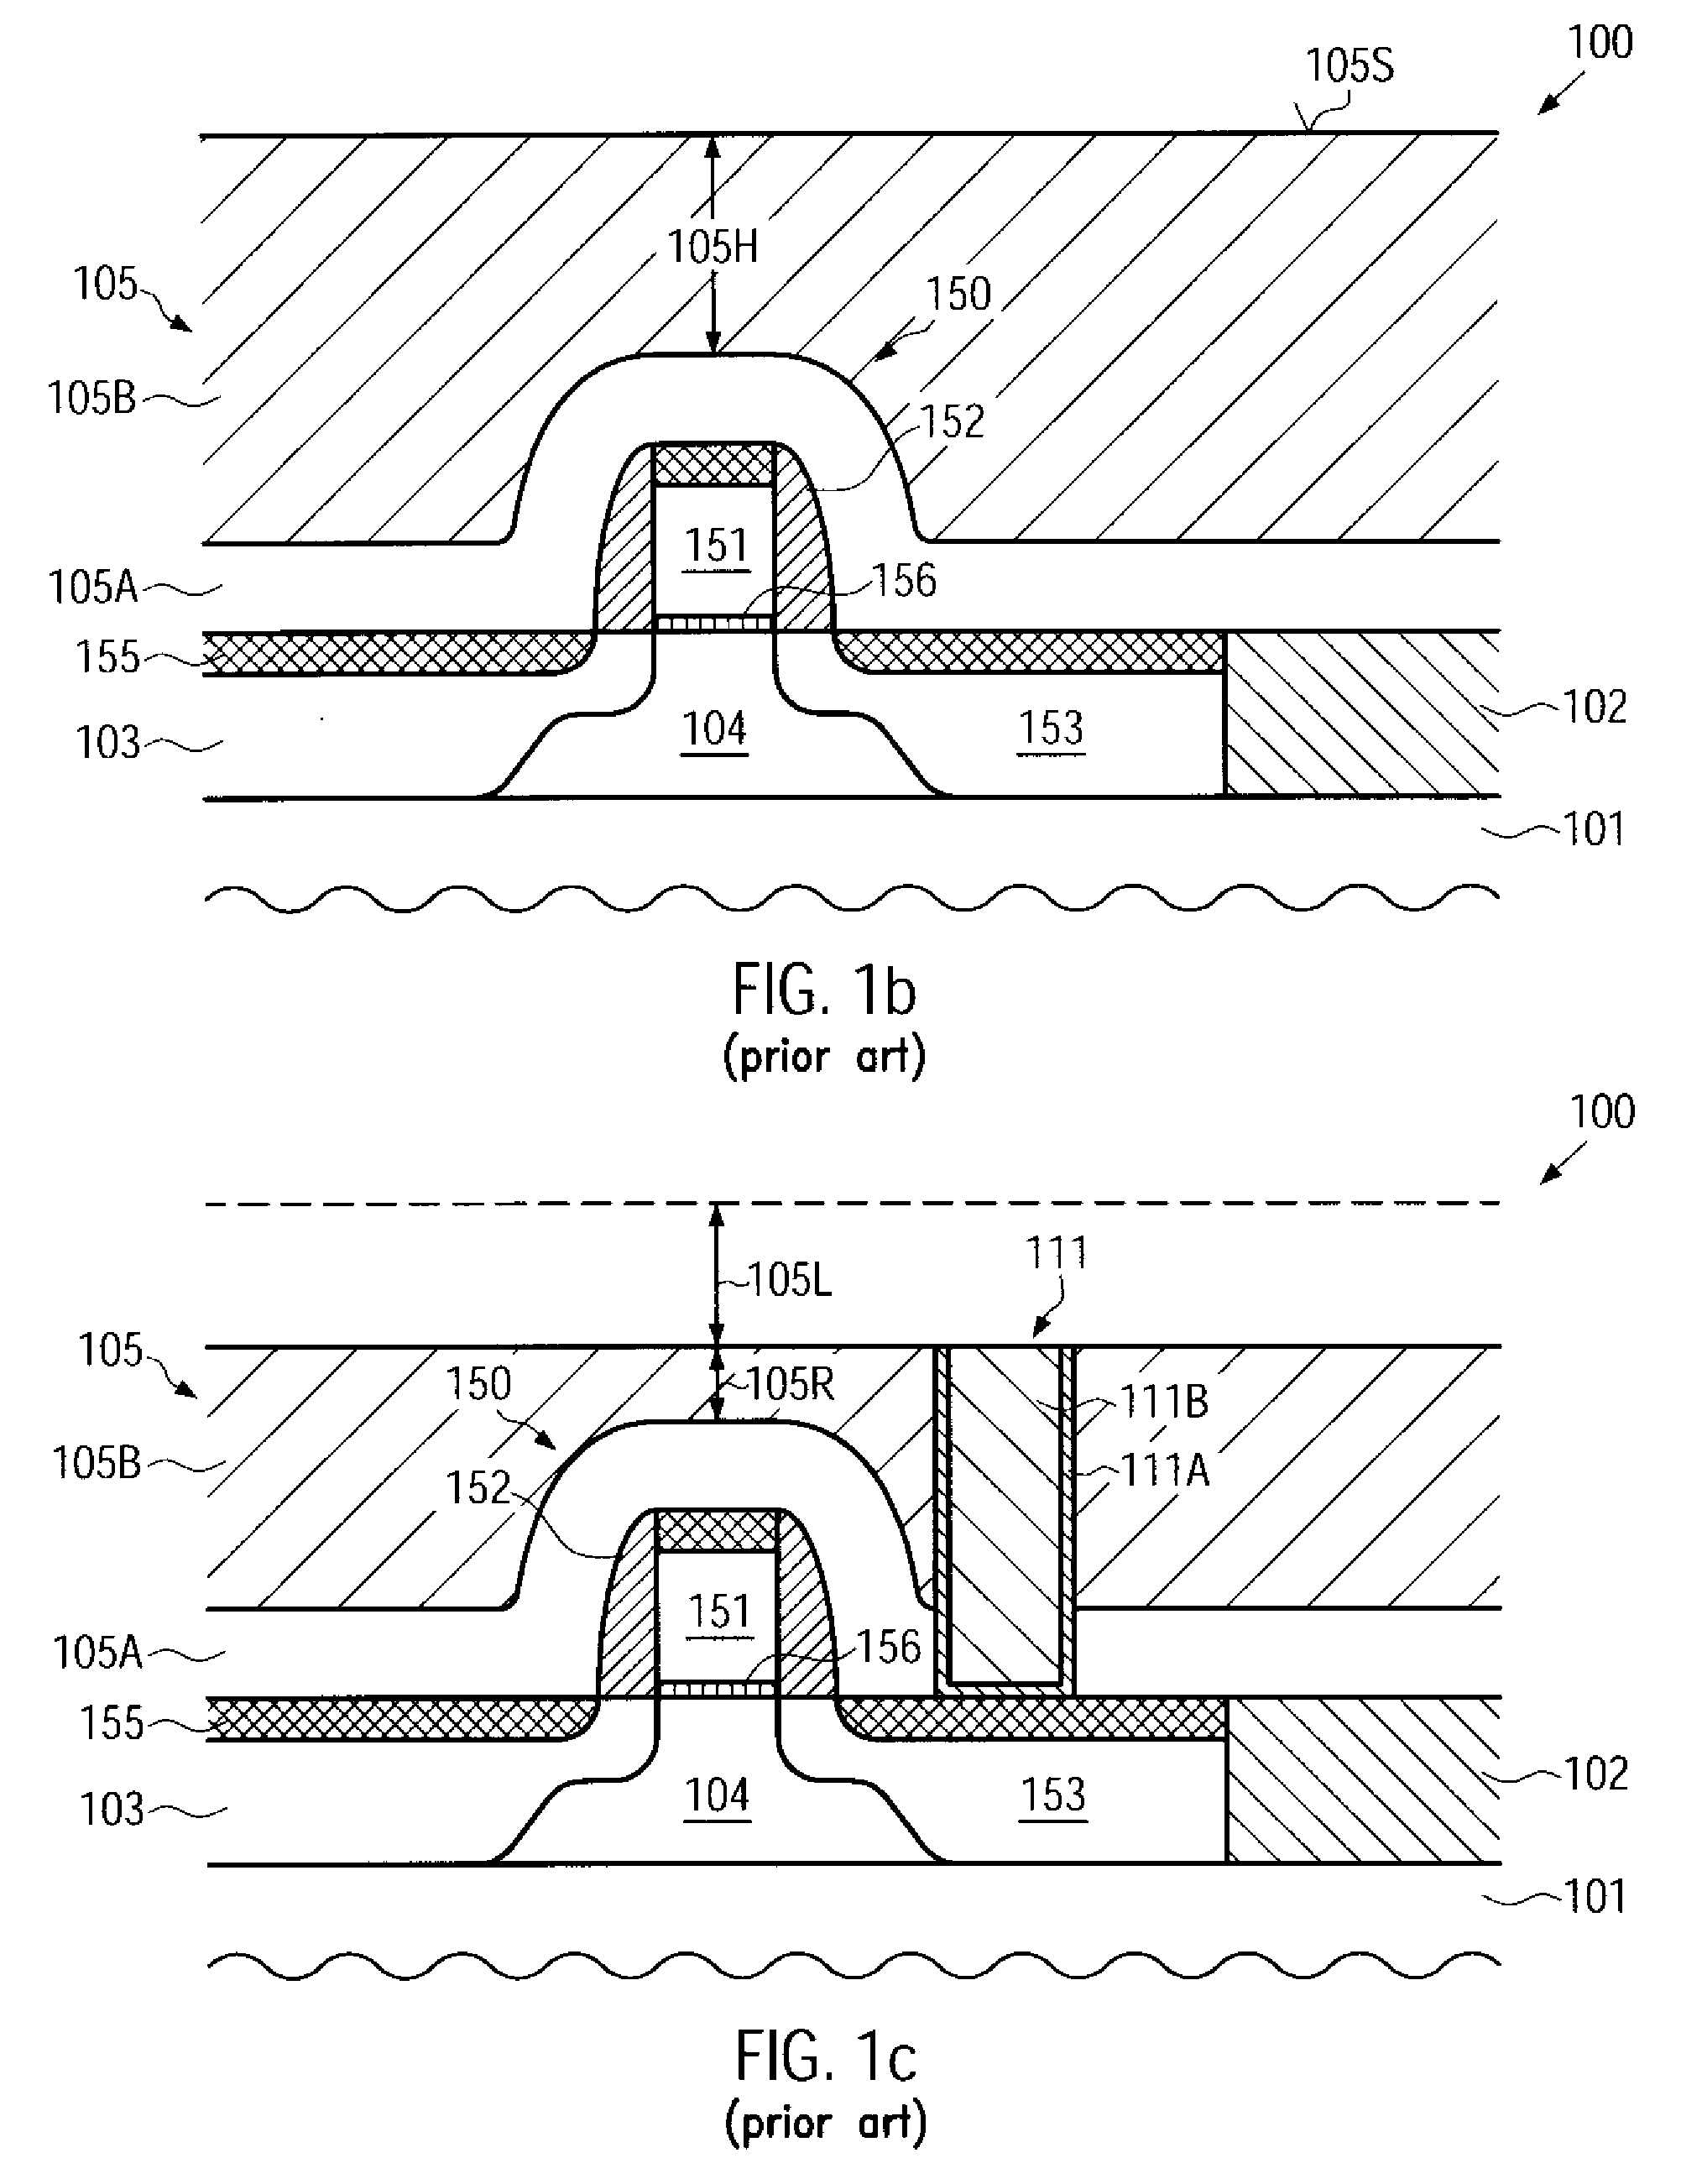 Method of forming an interlayer dielectric material having different removal rates during cmp